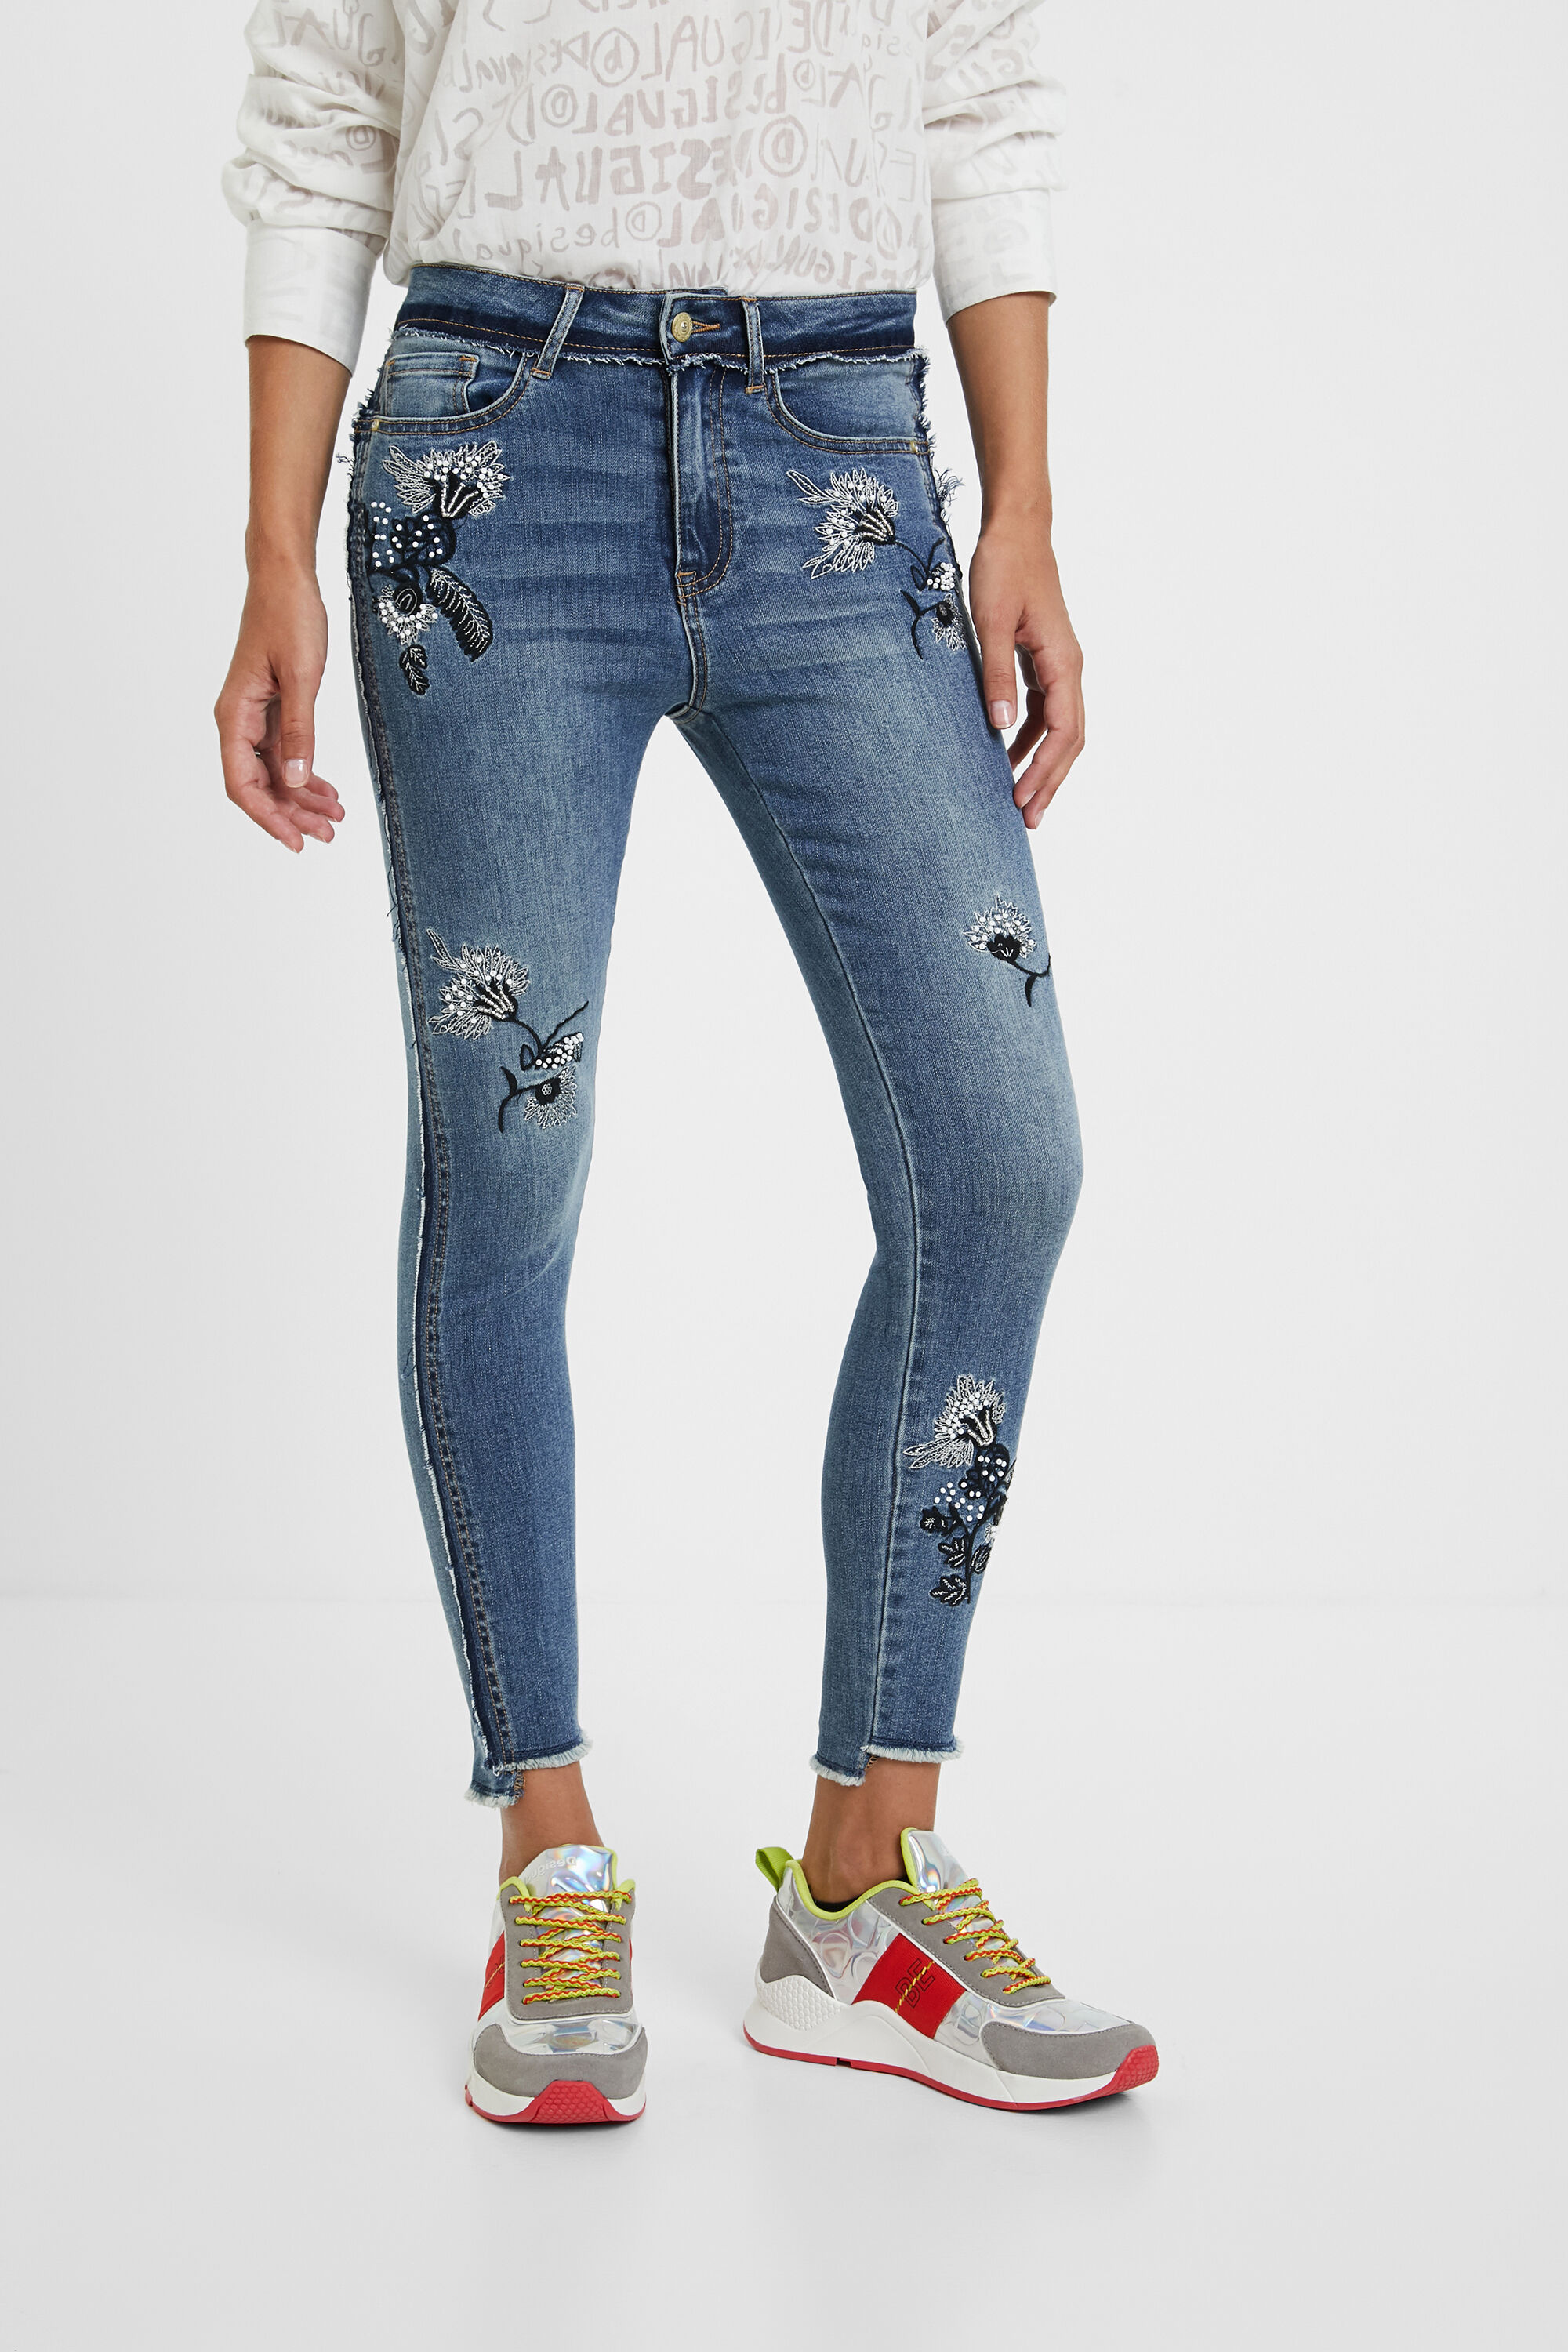 Skinny embroidered floral jeans 